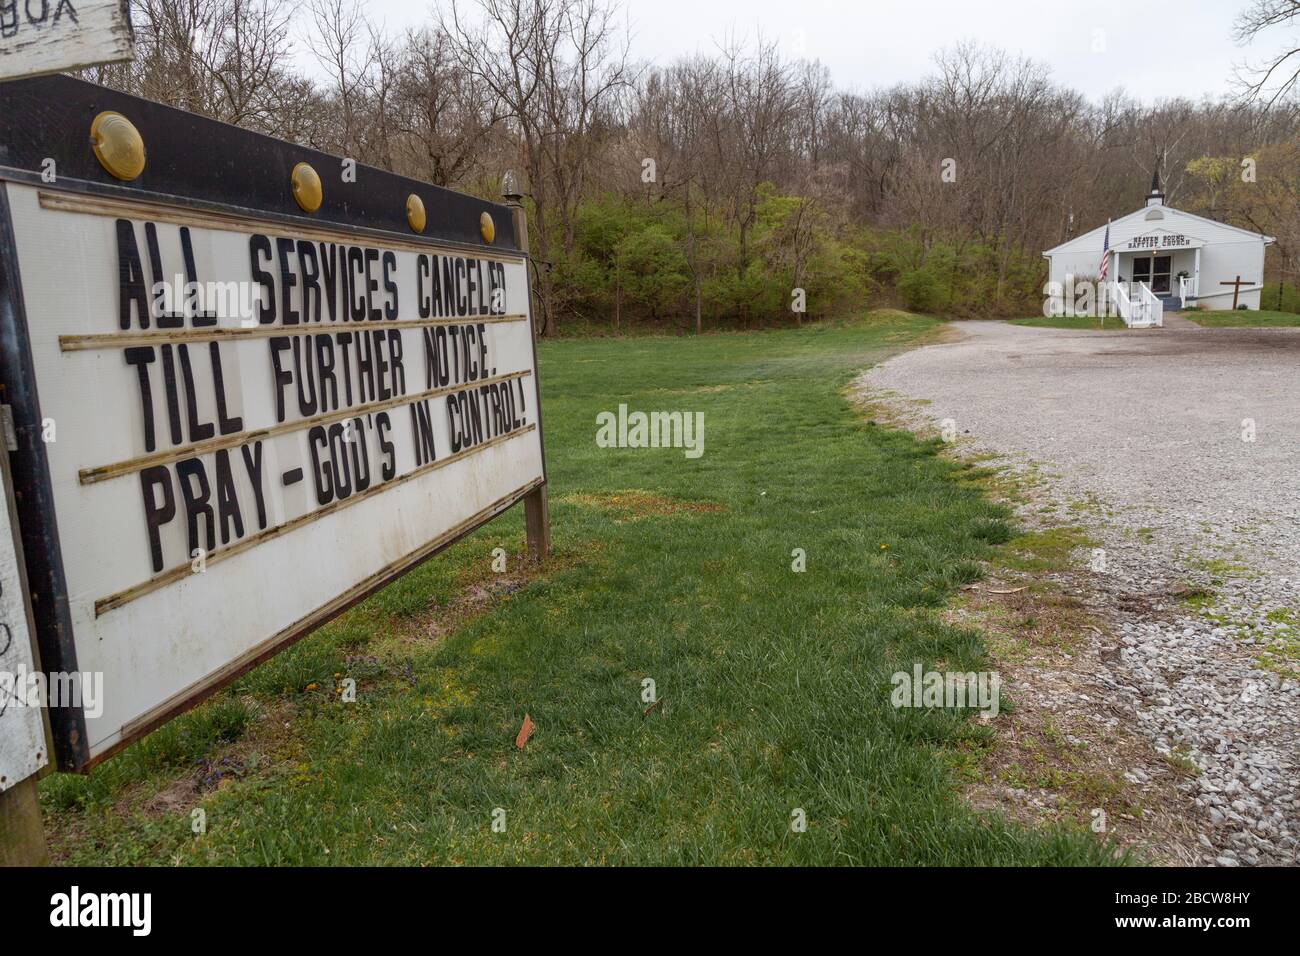 Cincinnati, Ohio, USA. 5th Apr 2020. A cancelled worship service sign at a closed Heaven Bound Baptist Church in the wake of the coronavirus COVID-19 pandemic, Sunday, April 5, 2020, in Cincinnati, USA. (Photo by IOS/Espa-Images) Credit: European Sports Photographic Agency/Alamy Live News Stock Photo